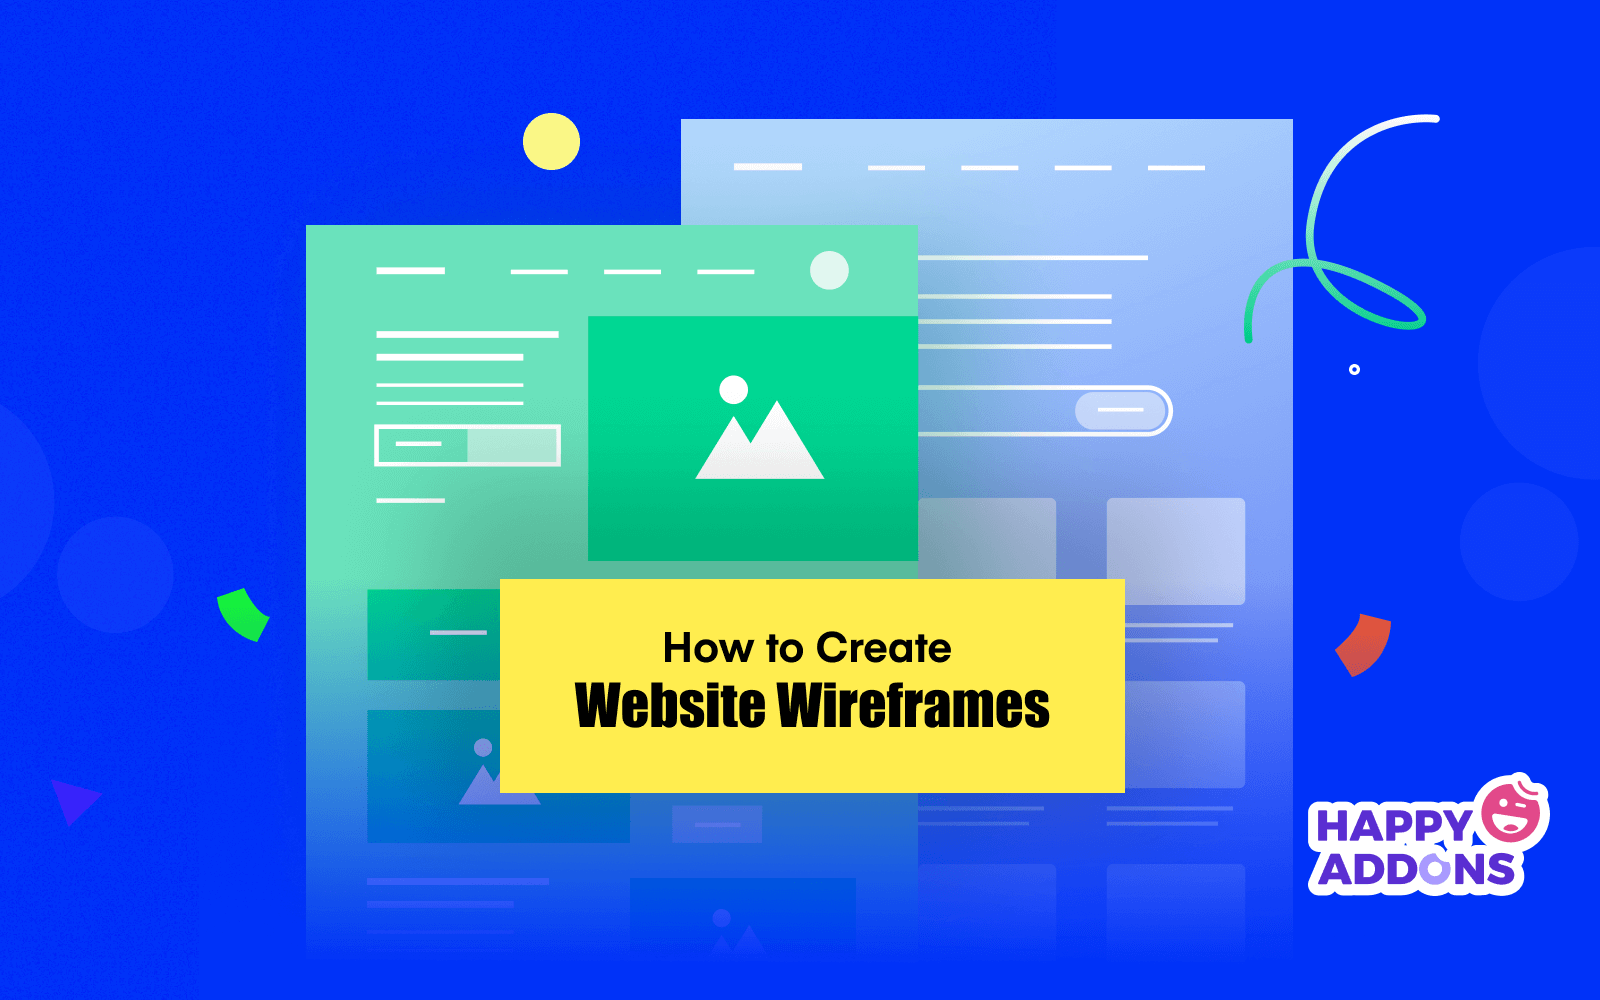 How to Create Website Wireframe